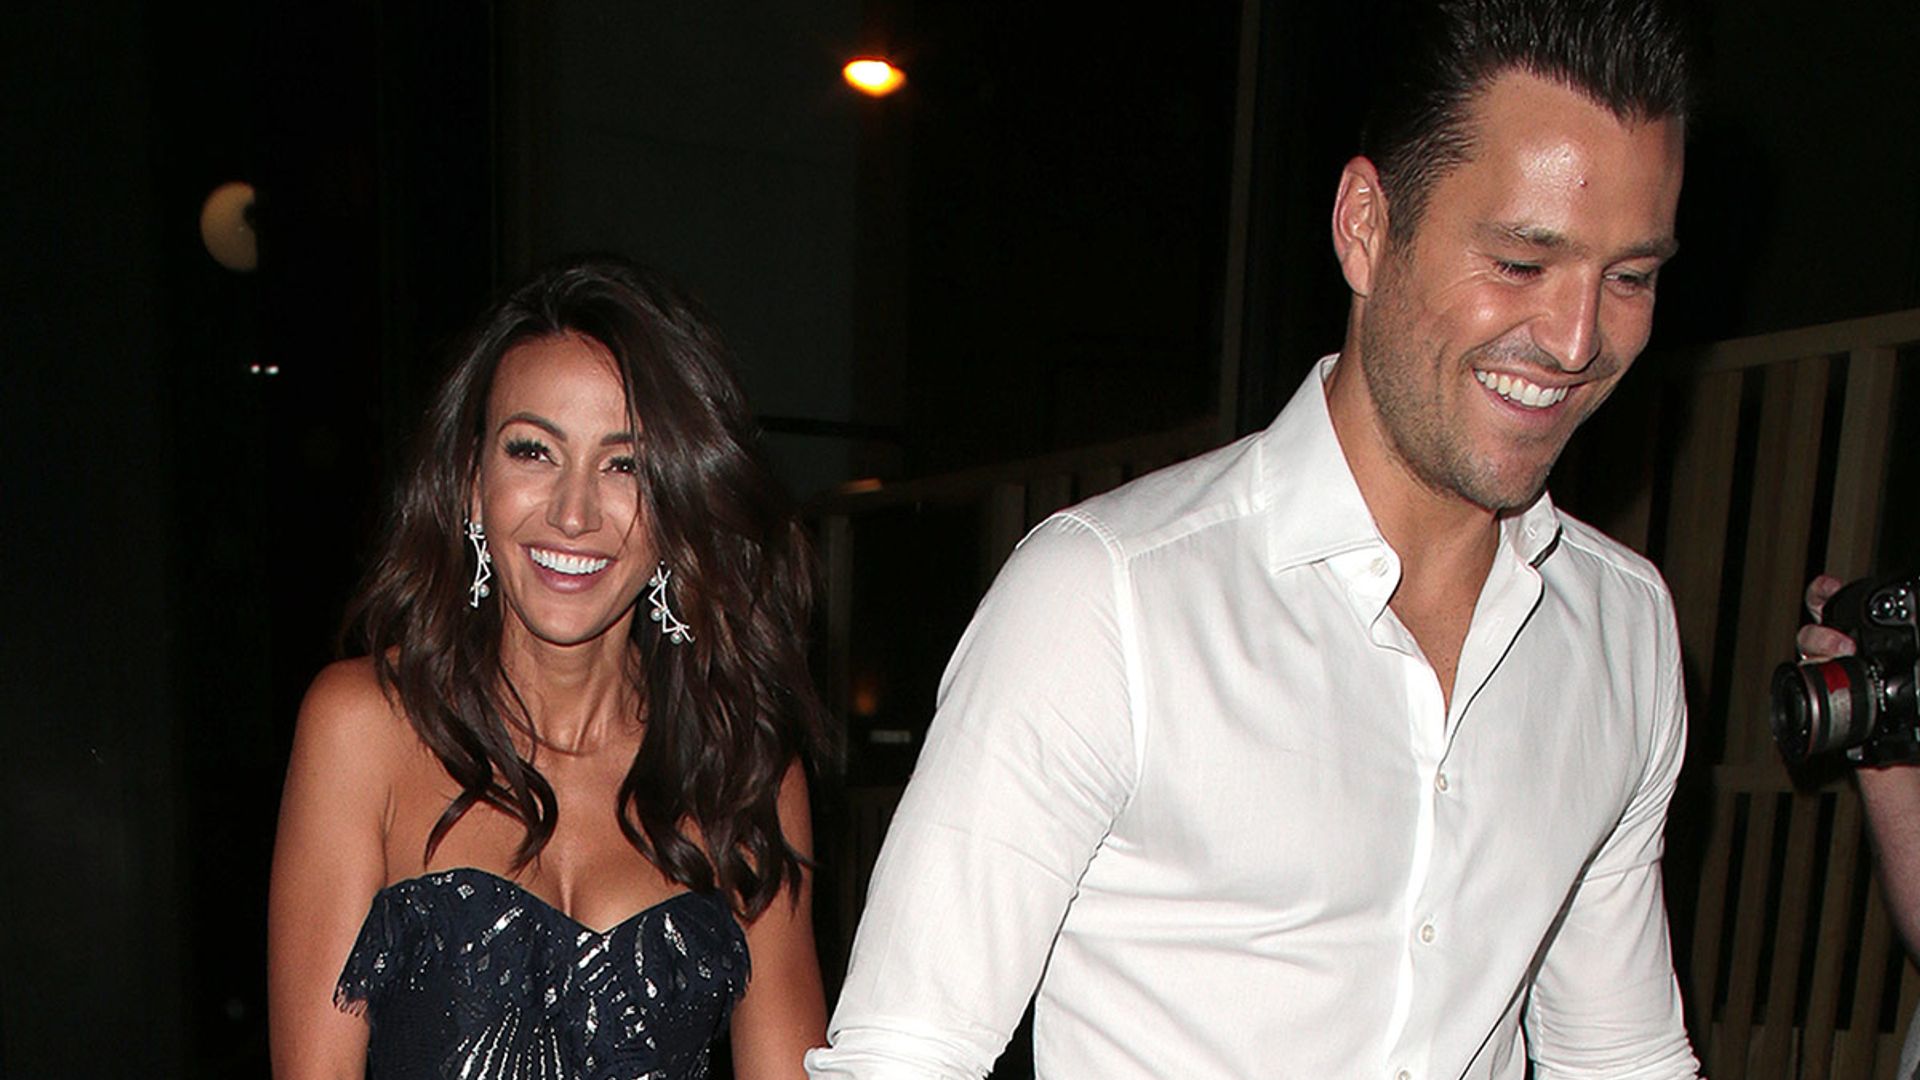 mark wright and michelle keegan intimate date night